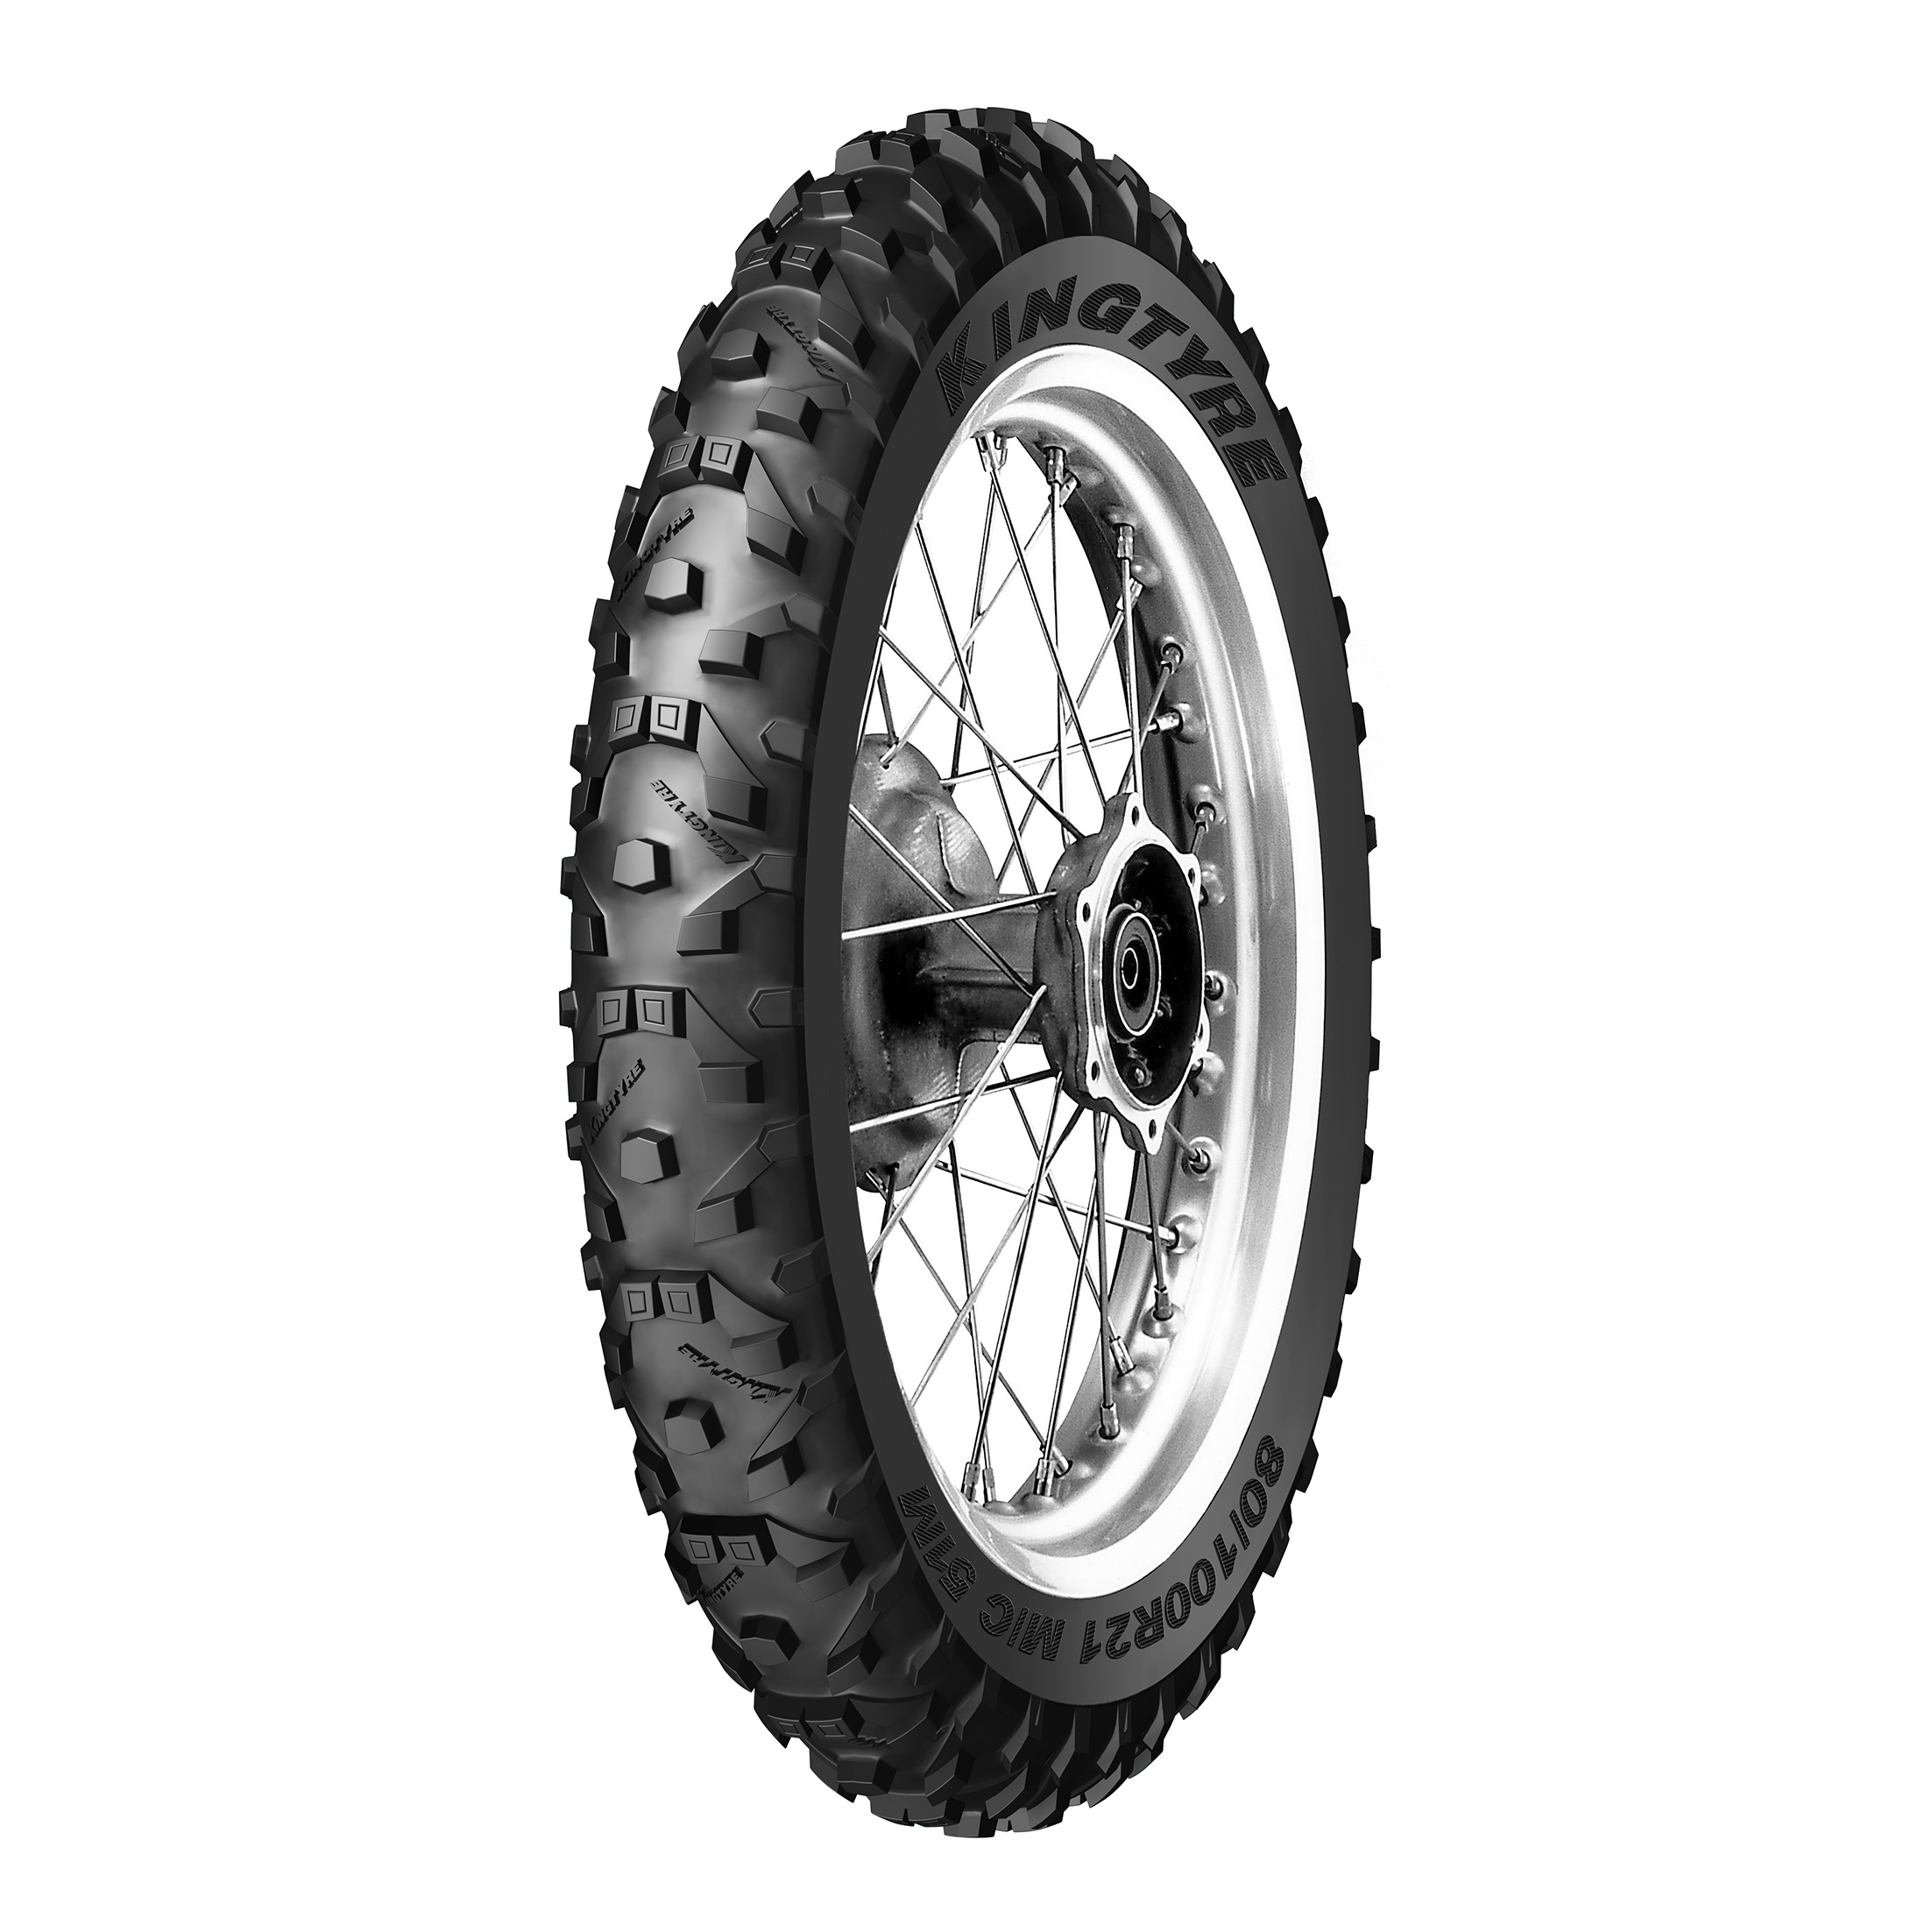 MOTOCROSS OFF ROAD TIRE K81 Featured Image